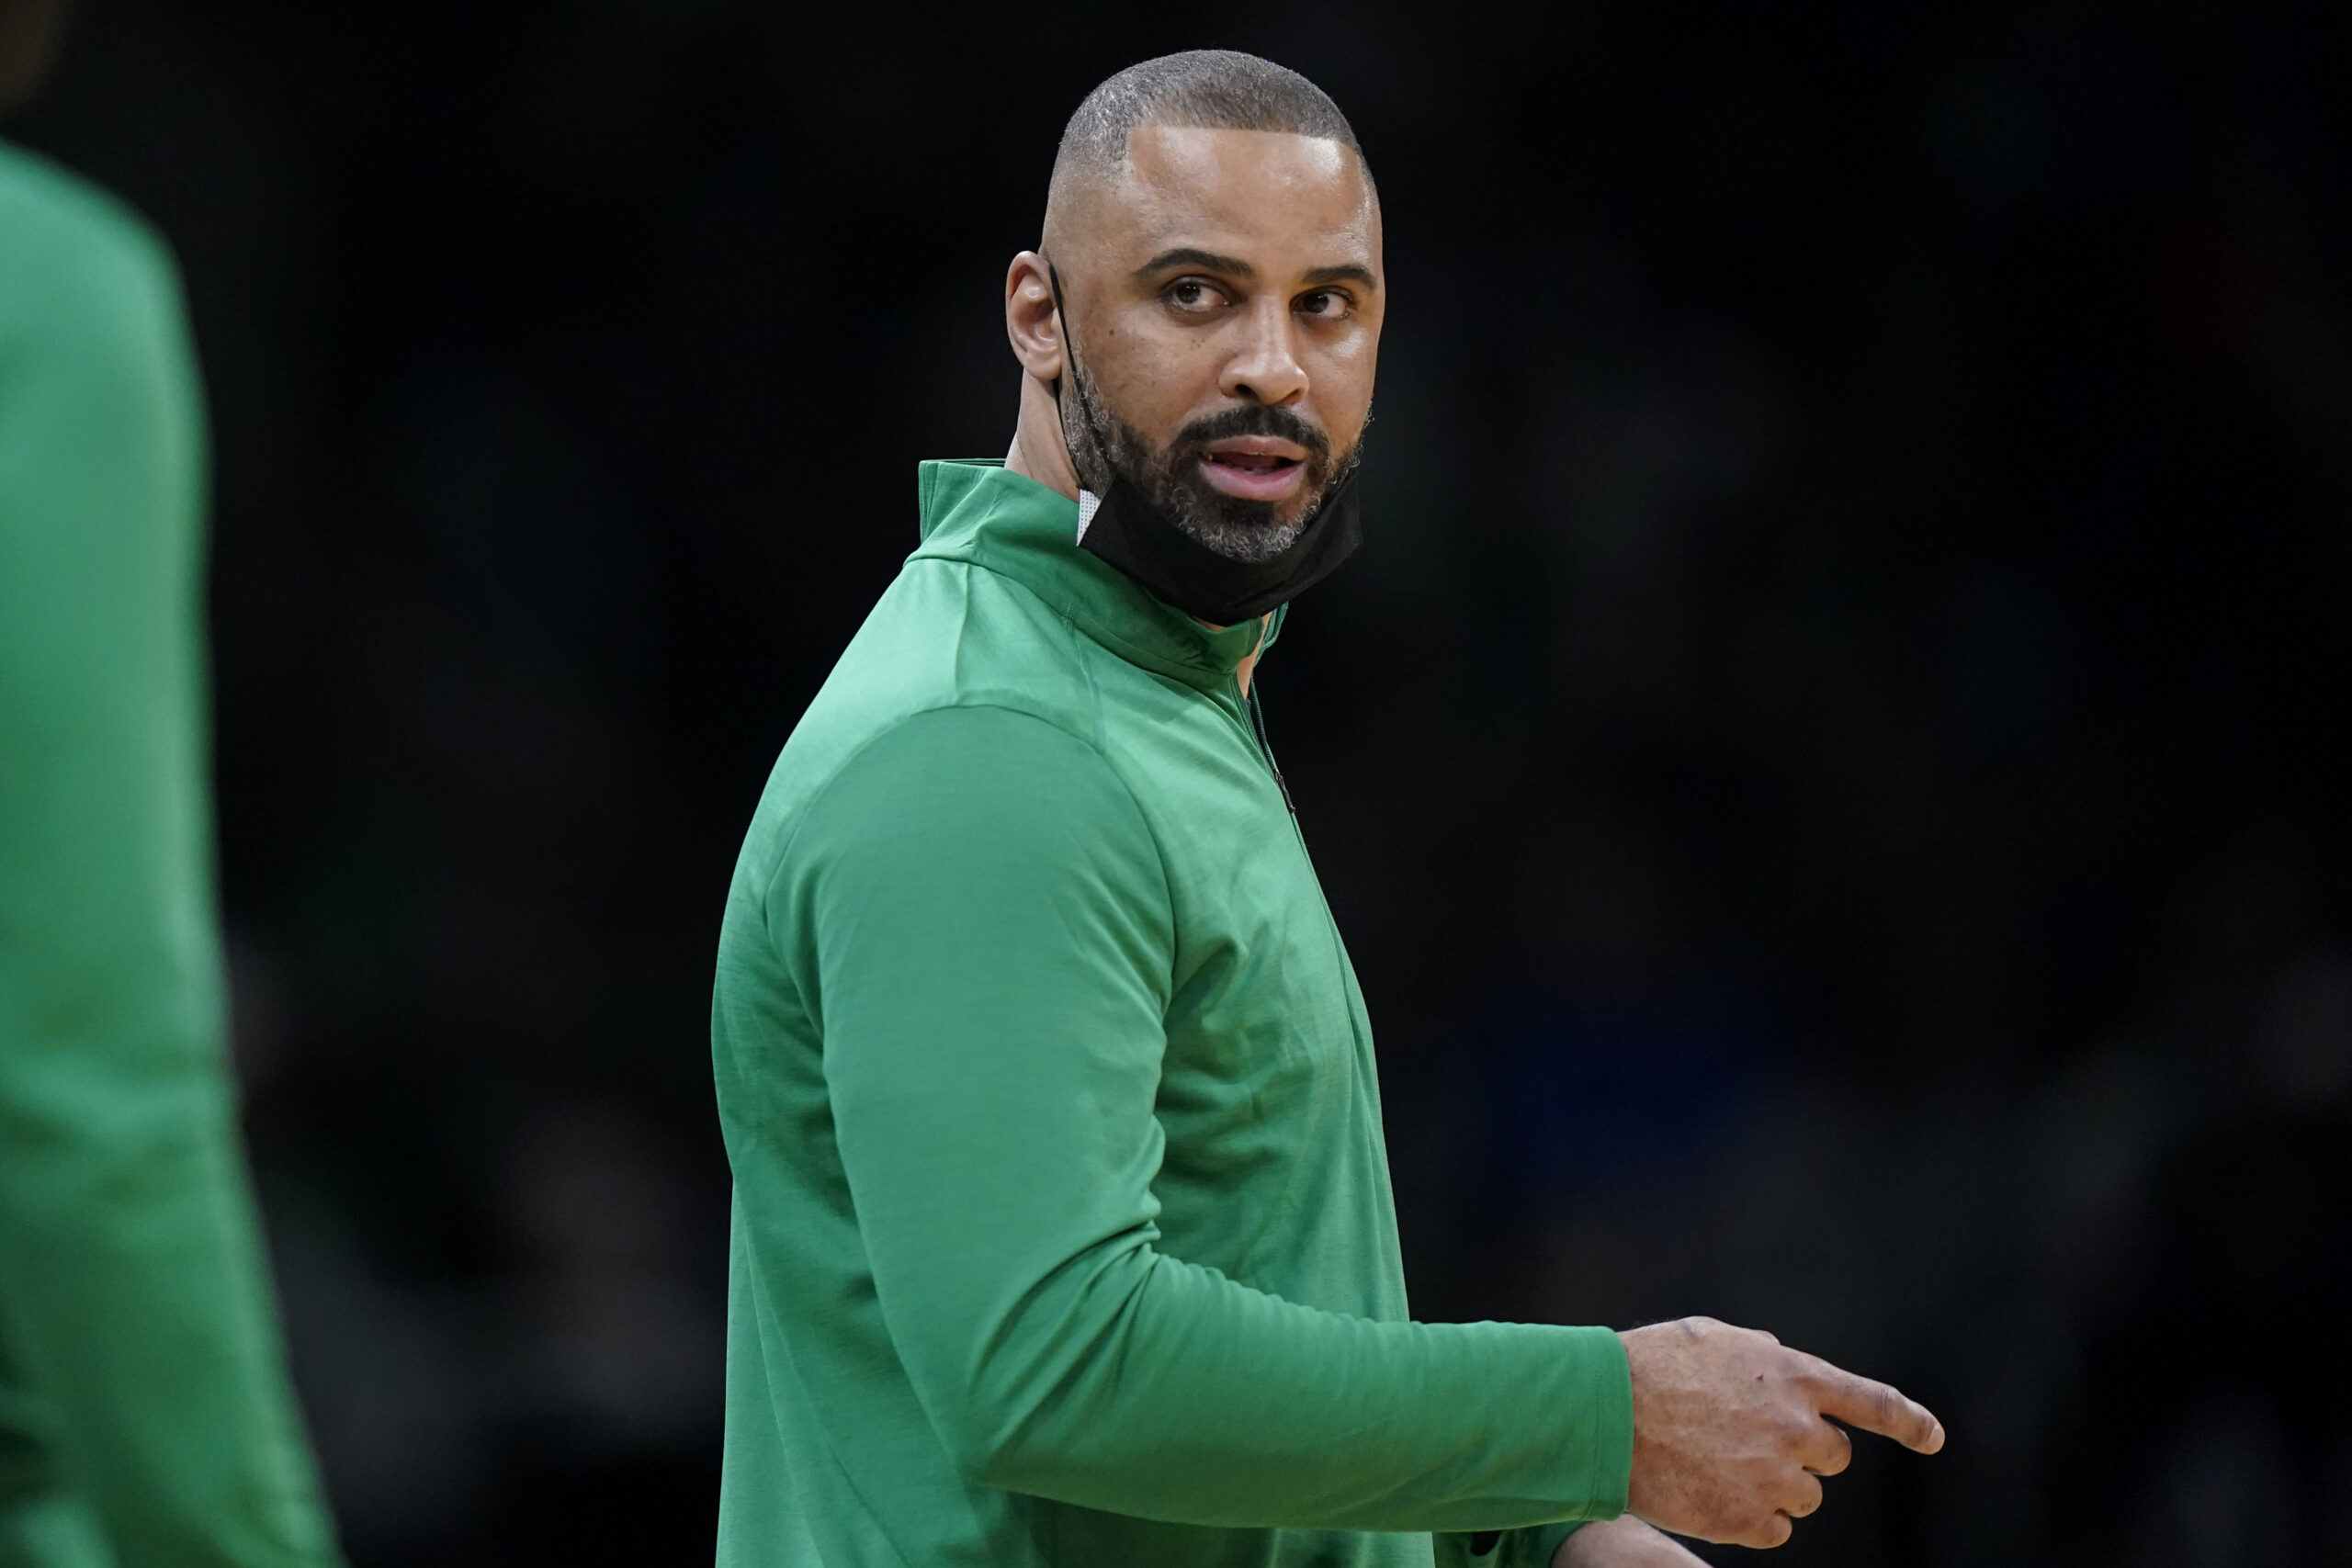 FILE - Boston Celtics head coach Ime Udoka speaks from the bench during the first half of an NBA basketball game against the Charlotte Hornets, Wednesday, Feb. 2, 2022, in Boston. The Boston Celtics are planning to discipline coach Ime Udoka, likely with a suspension, because of an improper relationship with a member of the organization, two people with knowledge of the matter told The Associated Press on Thursday, Sept. 22, 2022.(AP Photo/Steven Senne, File)